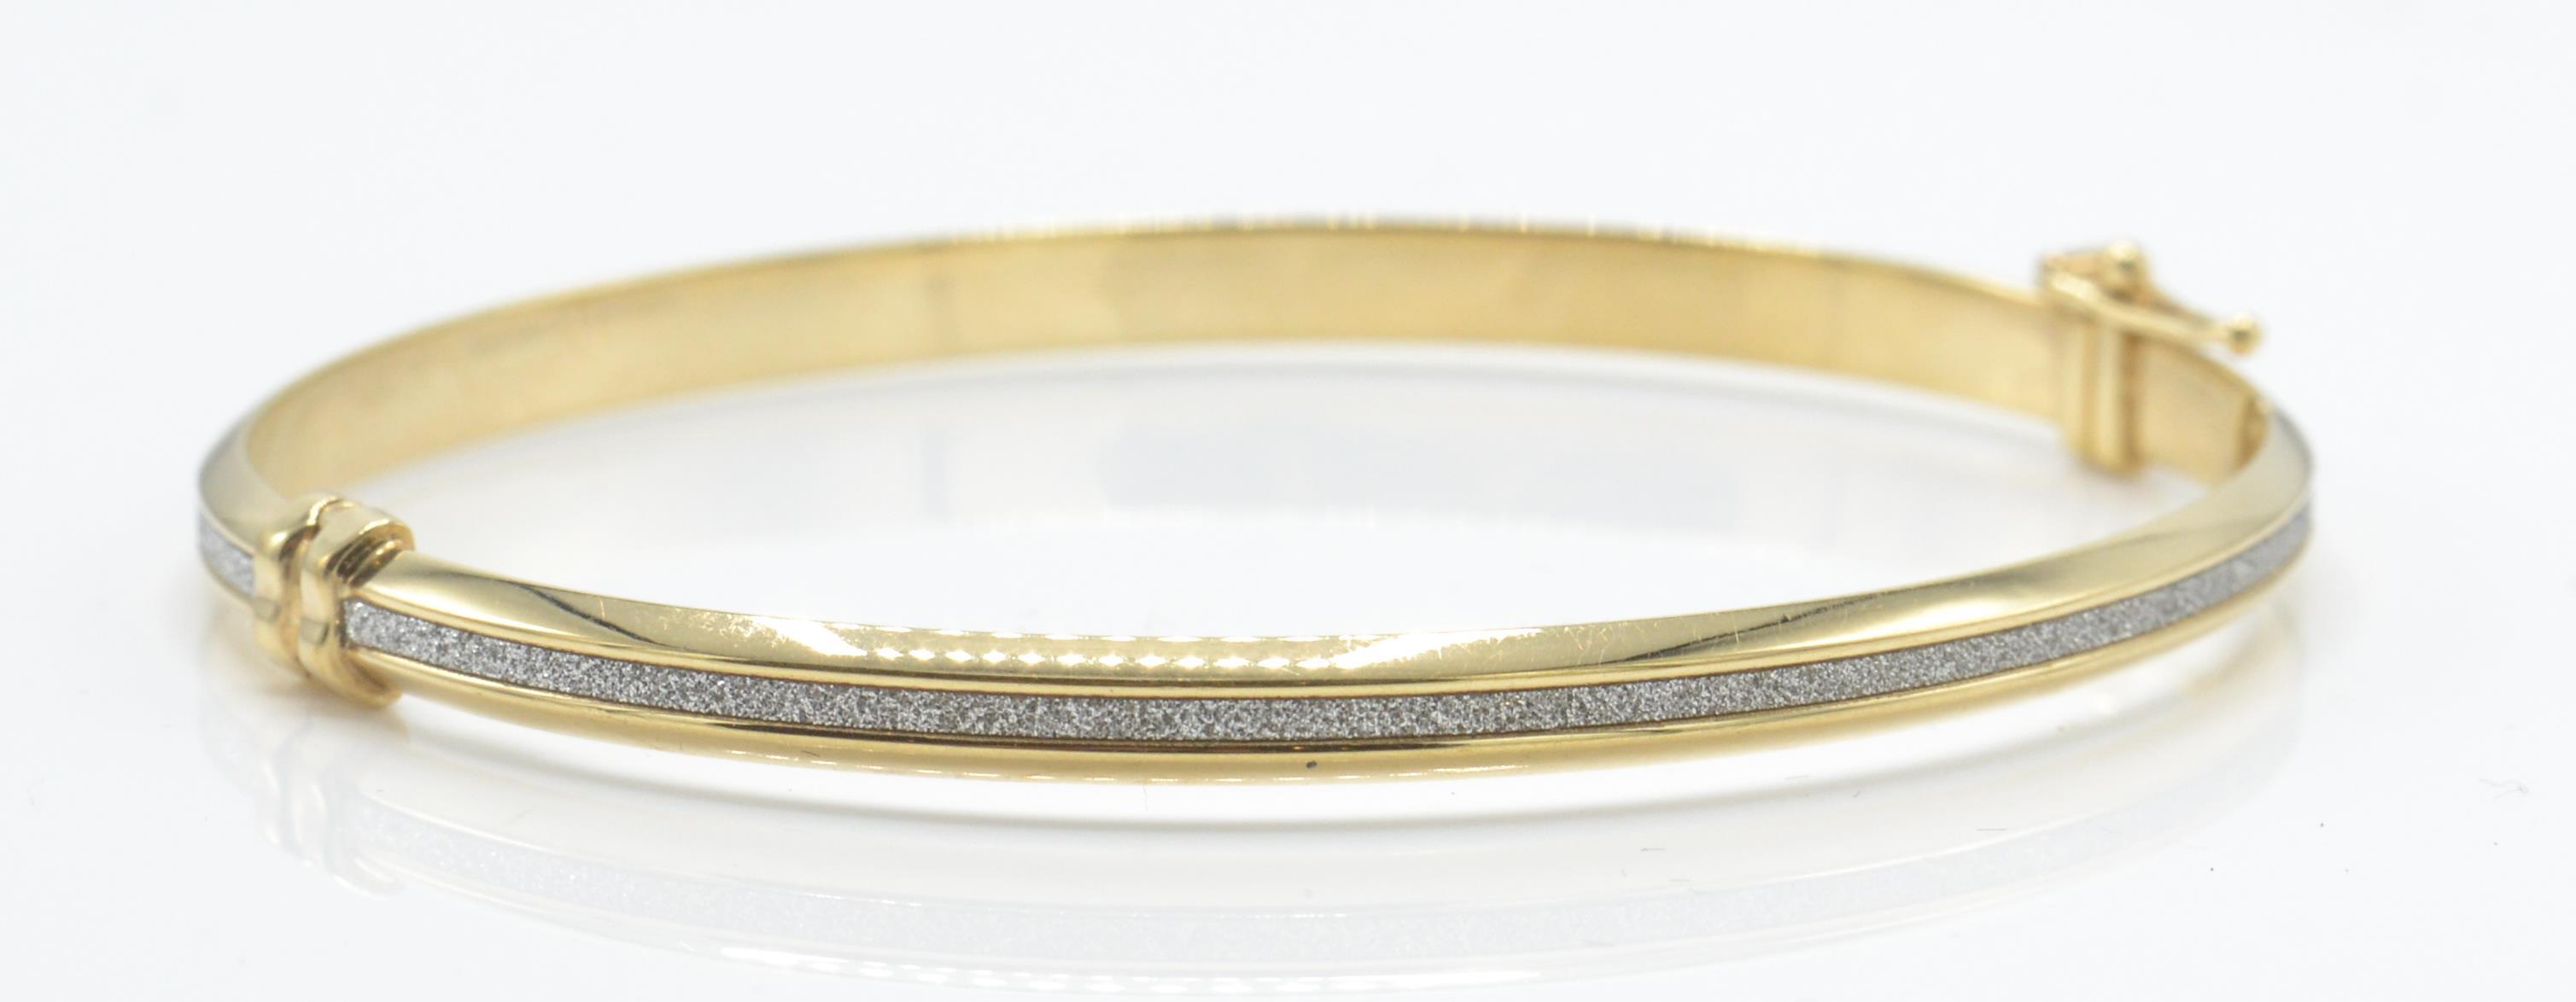 A Hallmarked 9ct White & Yellow Gold Bangle - Image 2 of 5